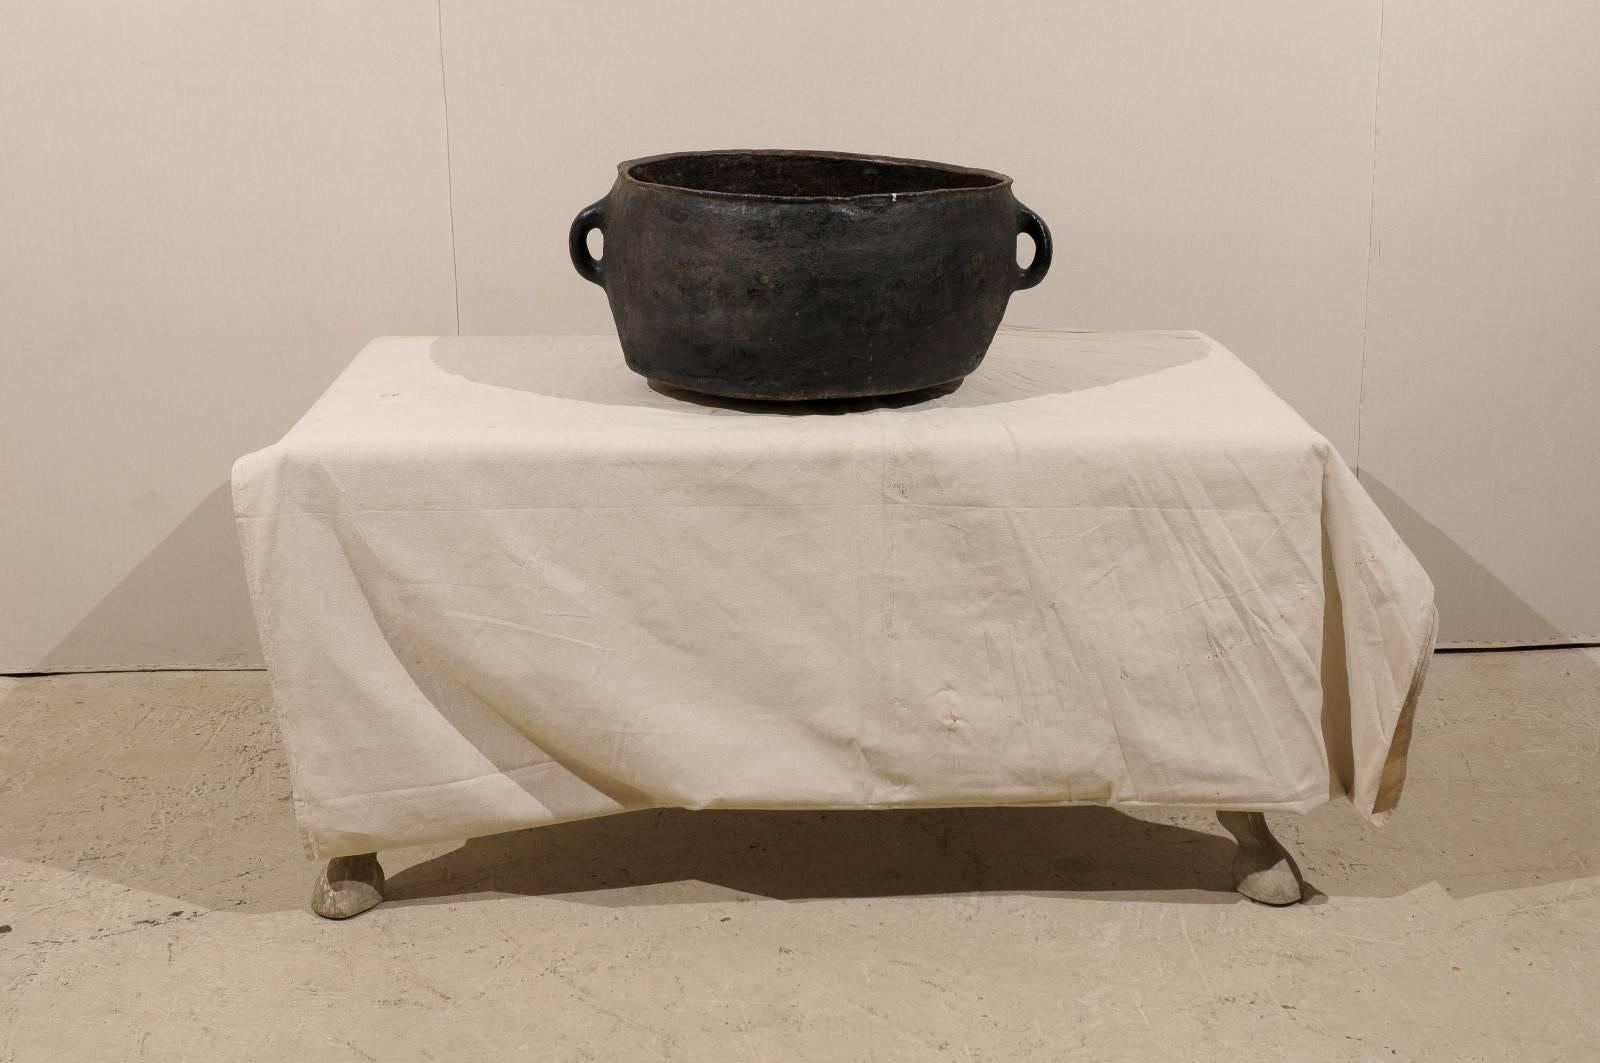 A Spanish Colonial cooking pot from the mid-19th century with wide mouth and two handles. This Spanish Colonial pot from Sacoj, Guatemala is made of clay. It is a deep black color. It was used to cook beans.